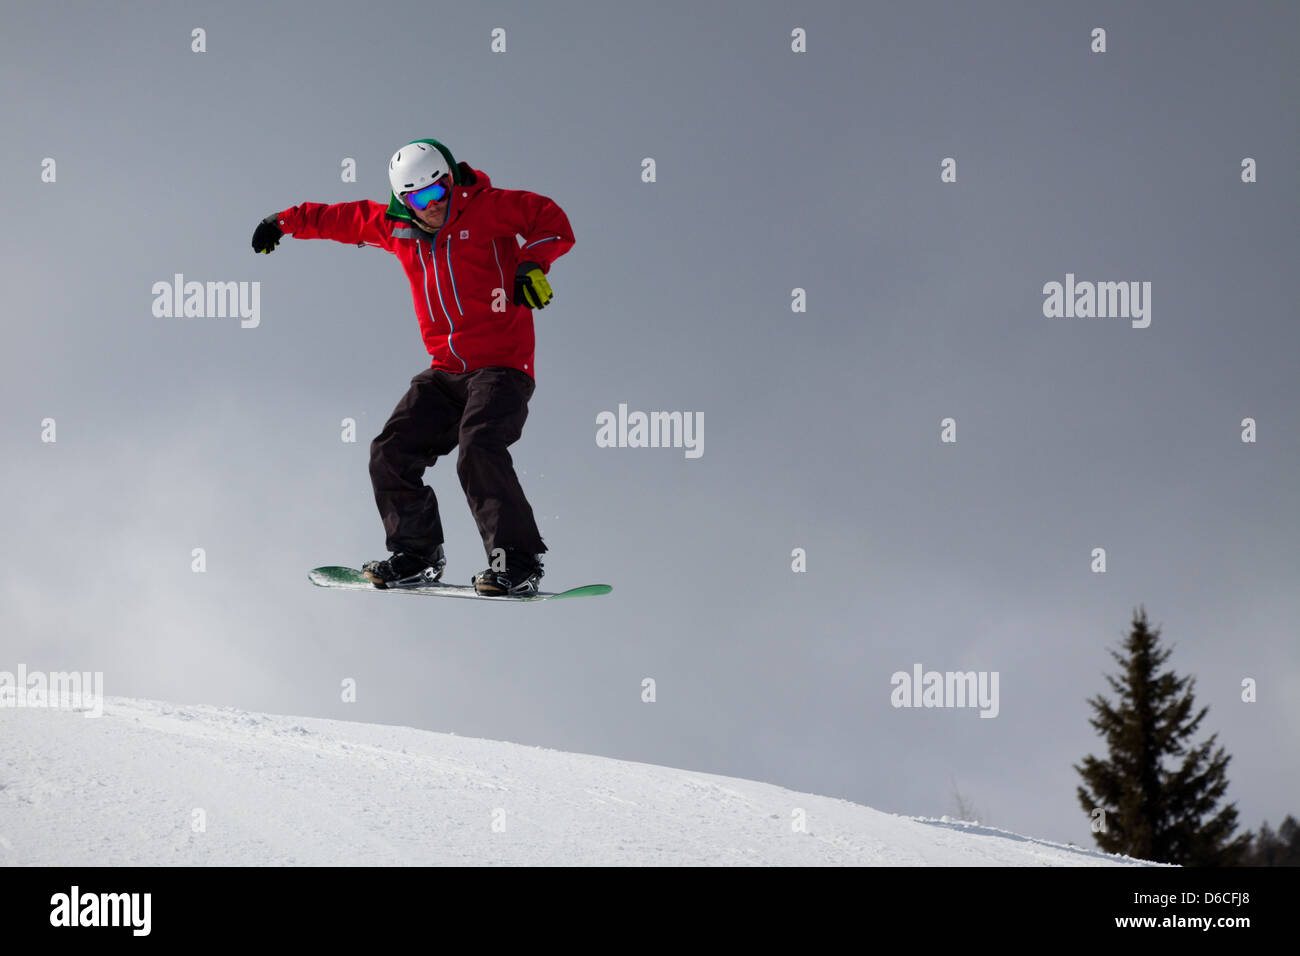 A snowboarder makes a jump at Red Mountain resort, Canada Stock Photo